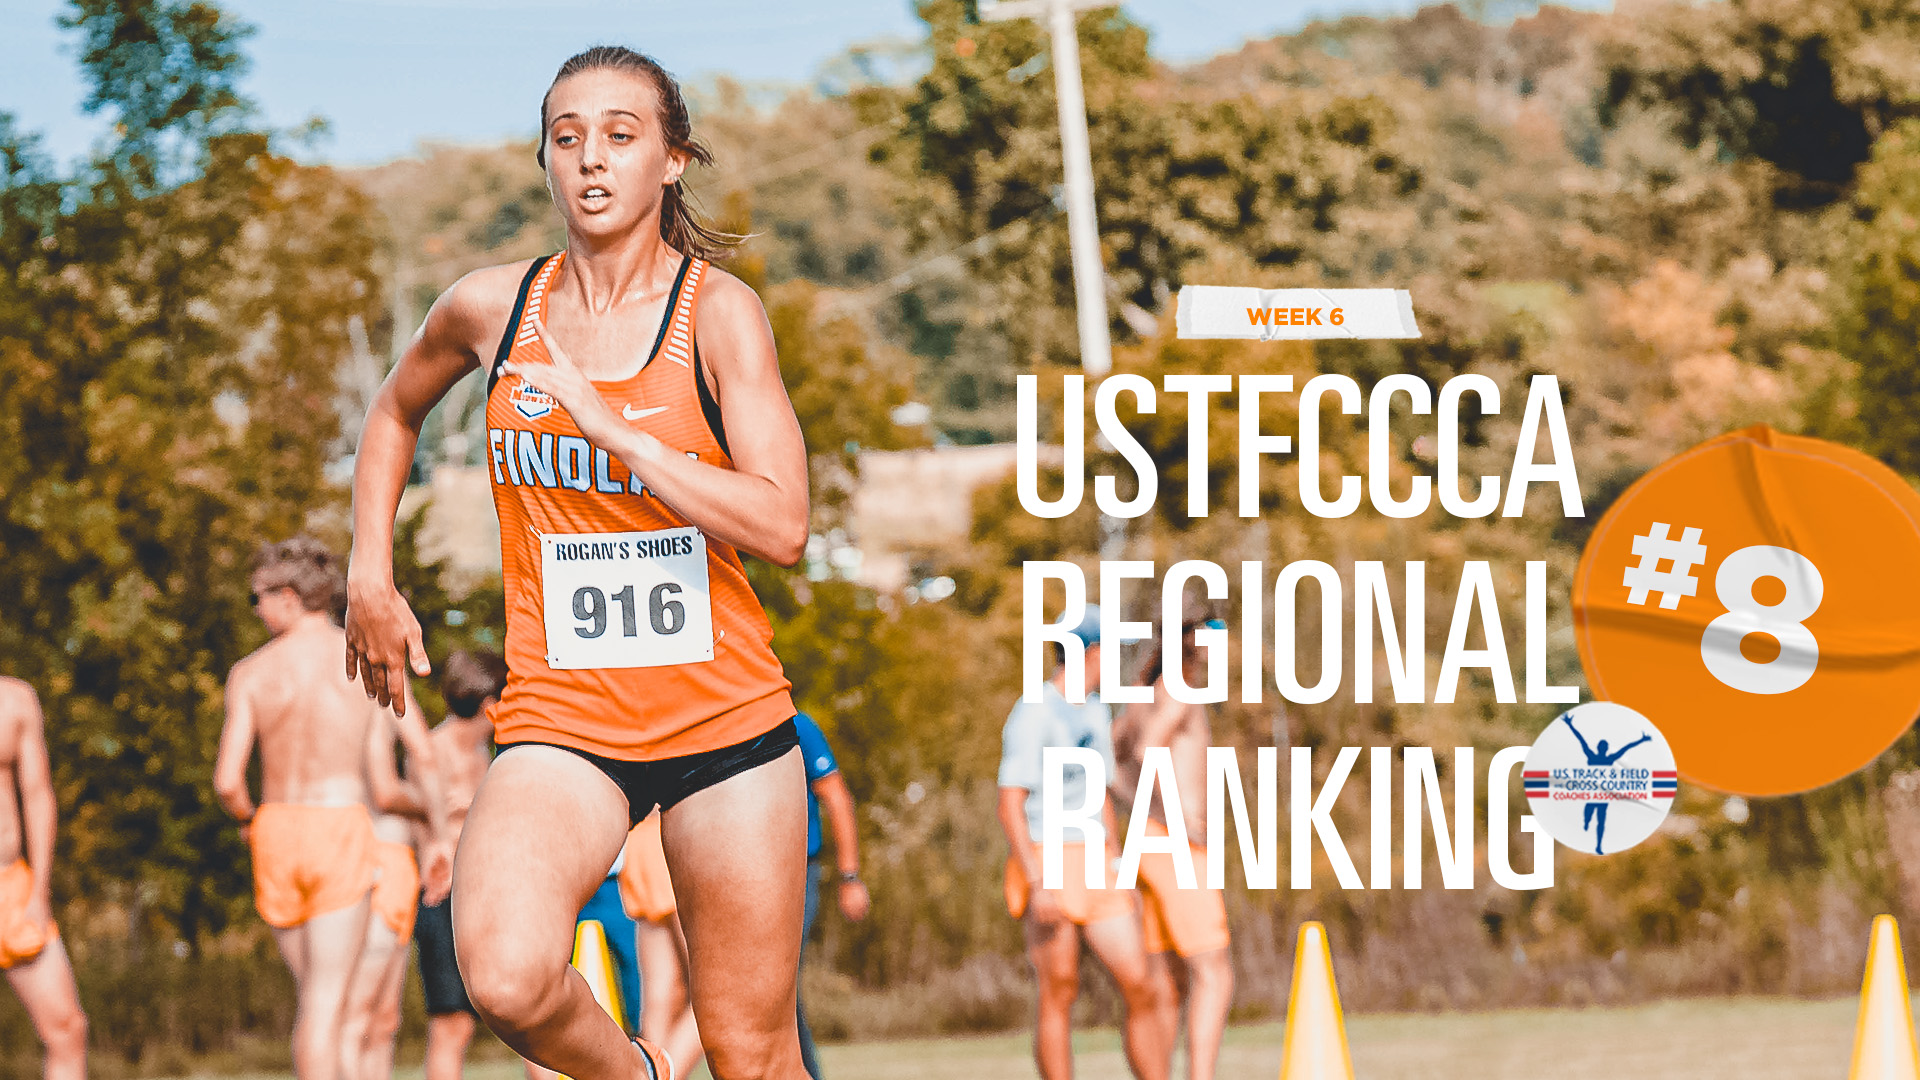 Women's CC Ranked Eighth in Latest Regional Poll